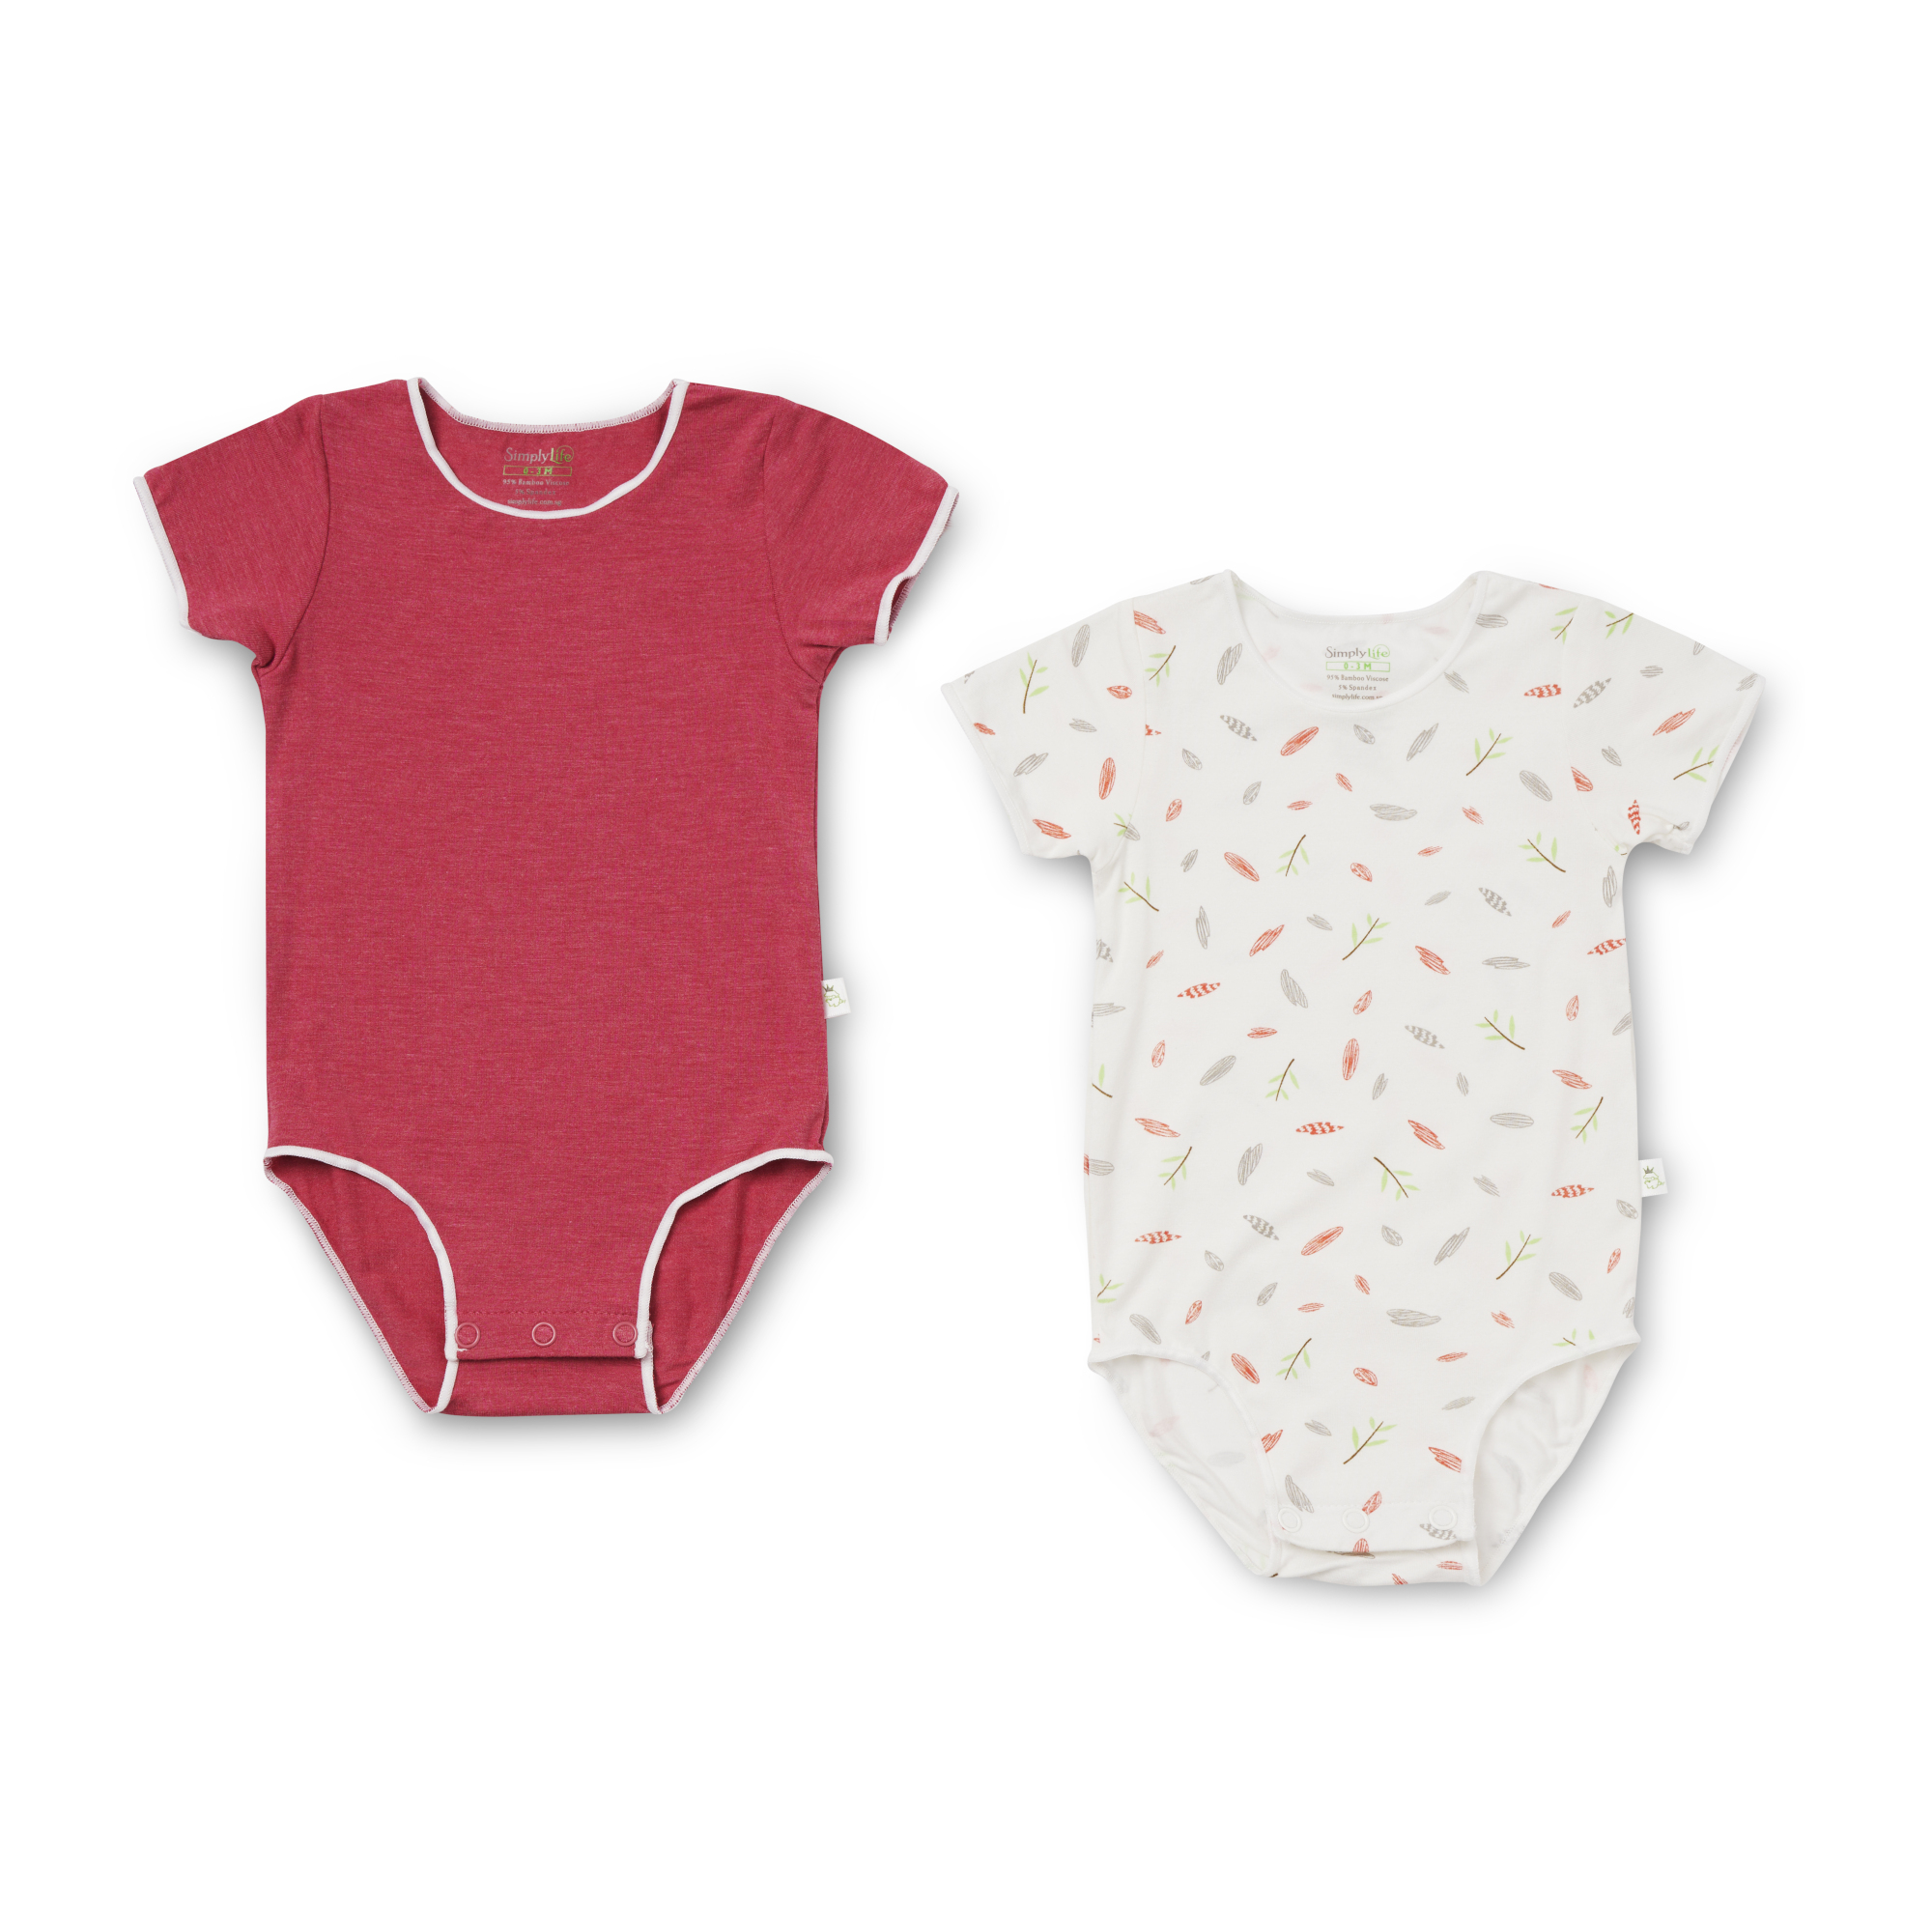 baby-fair Simply Life Scandinavian Leaves and Sandwash Ruby Red - Short-Sleeved Stretchy Romper (Value pack of 2)